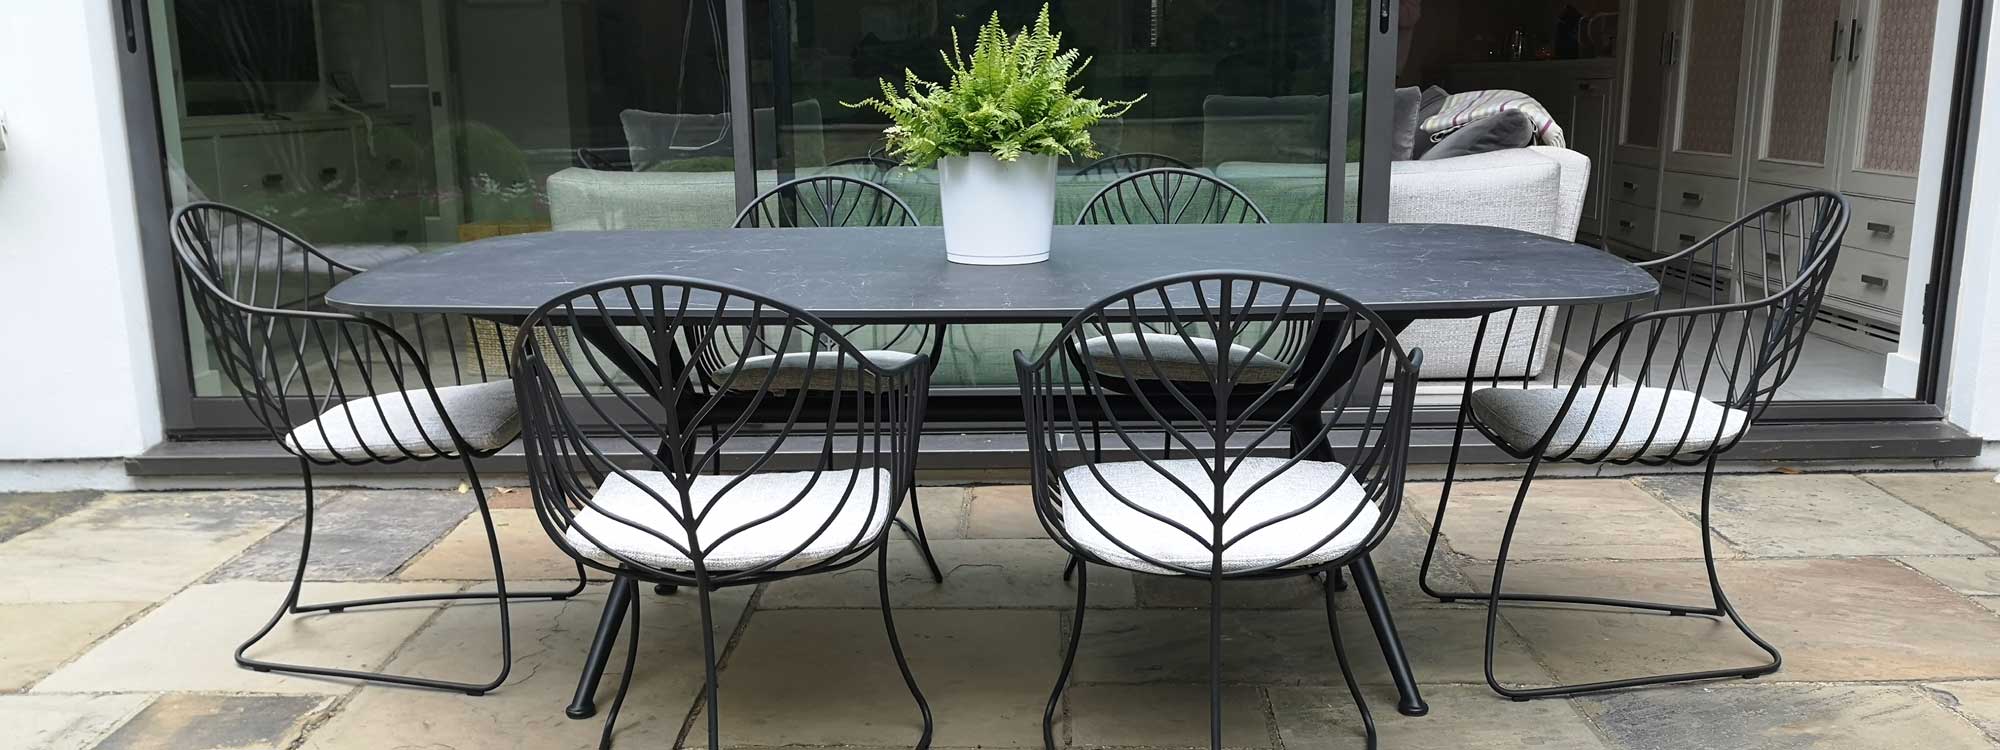 Image of Exes oval garden table & Folia chairs by Royal Botania